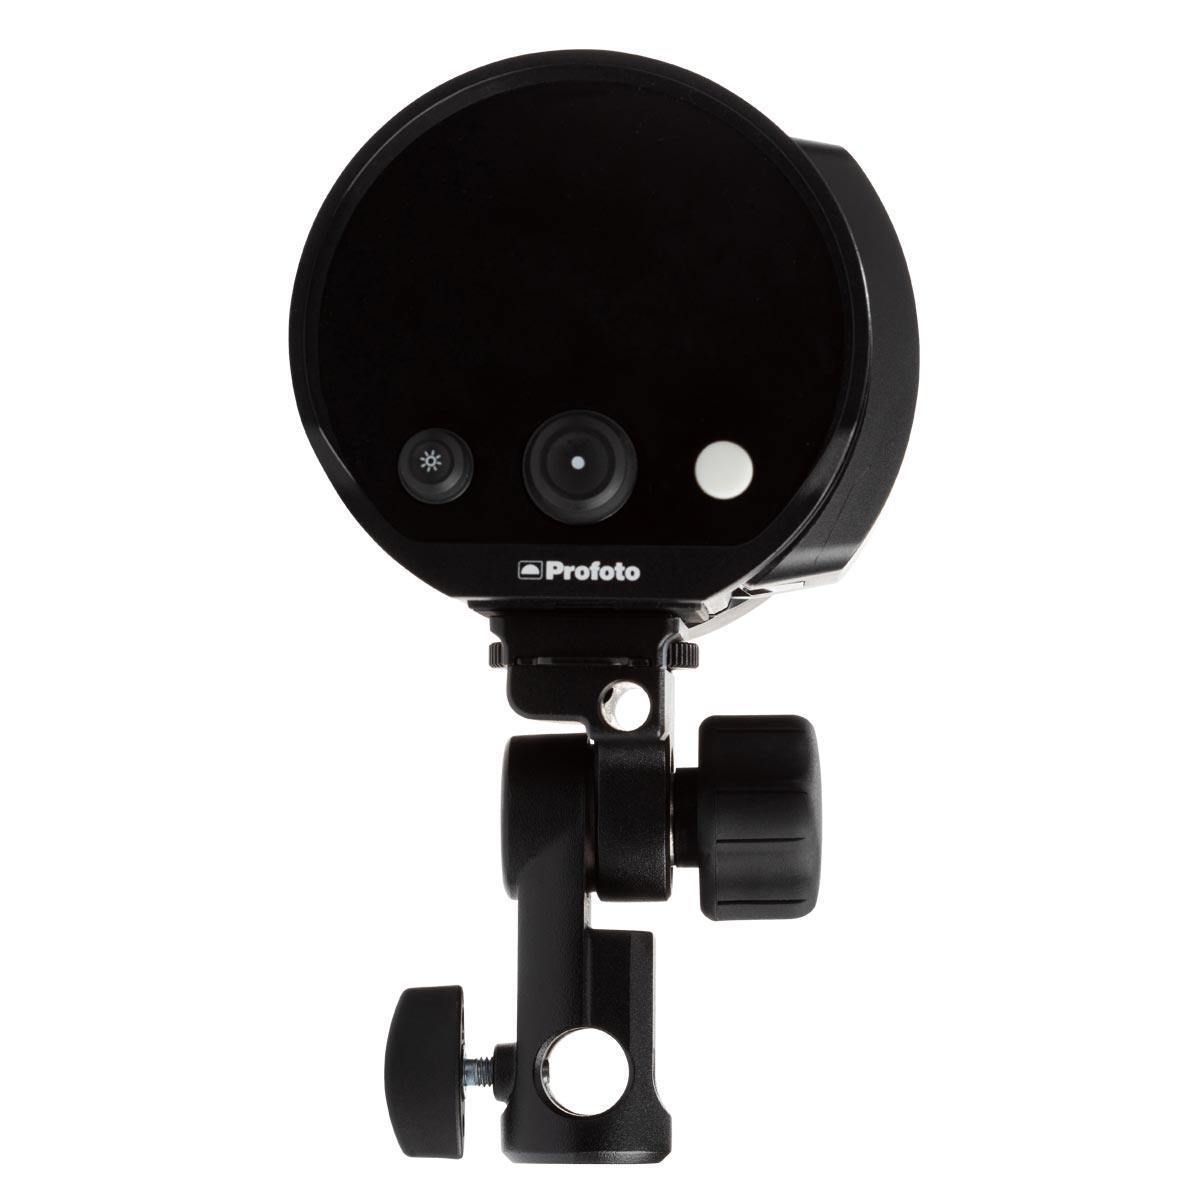 A34 Replacement Knob for Profoto B10 OCF Flash Head